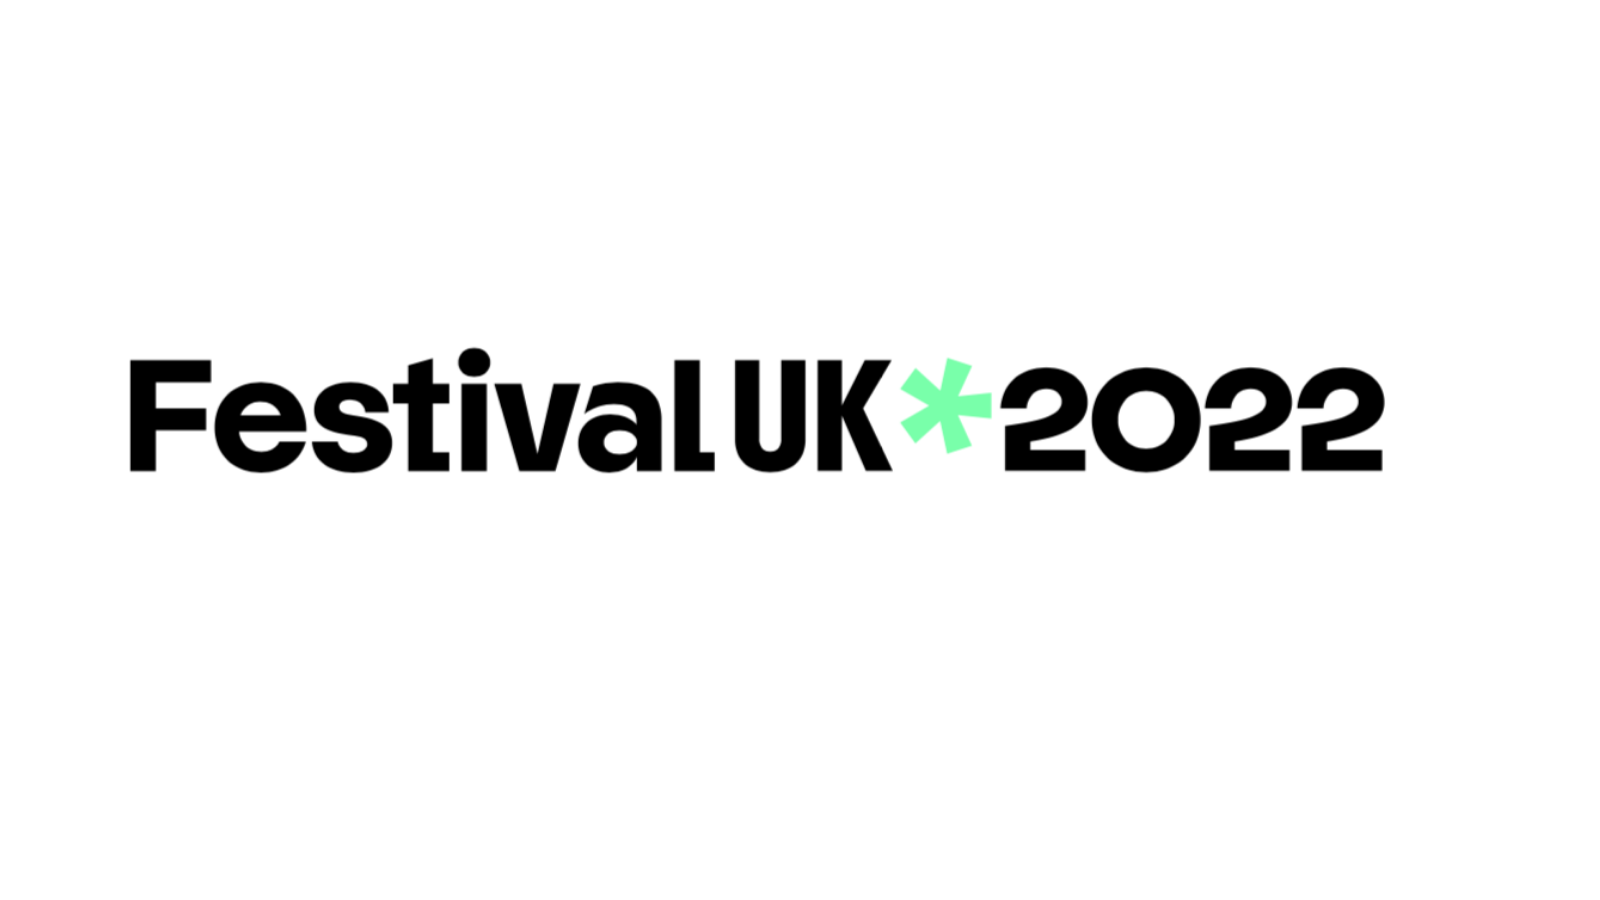 30 creative teams awarded up to £100,000 for Festival UK* 2022 R&D project